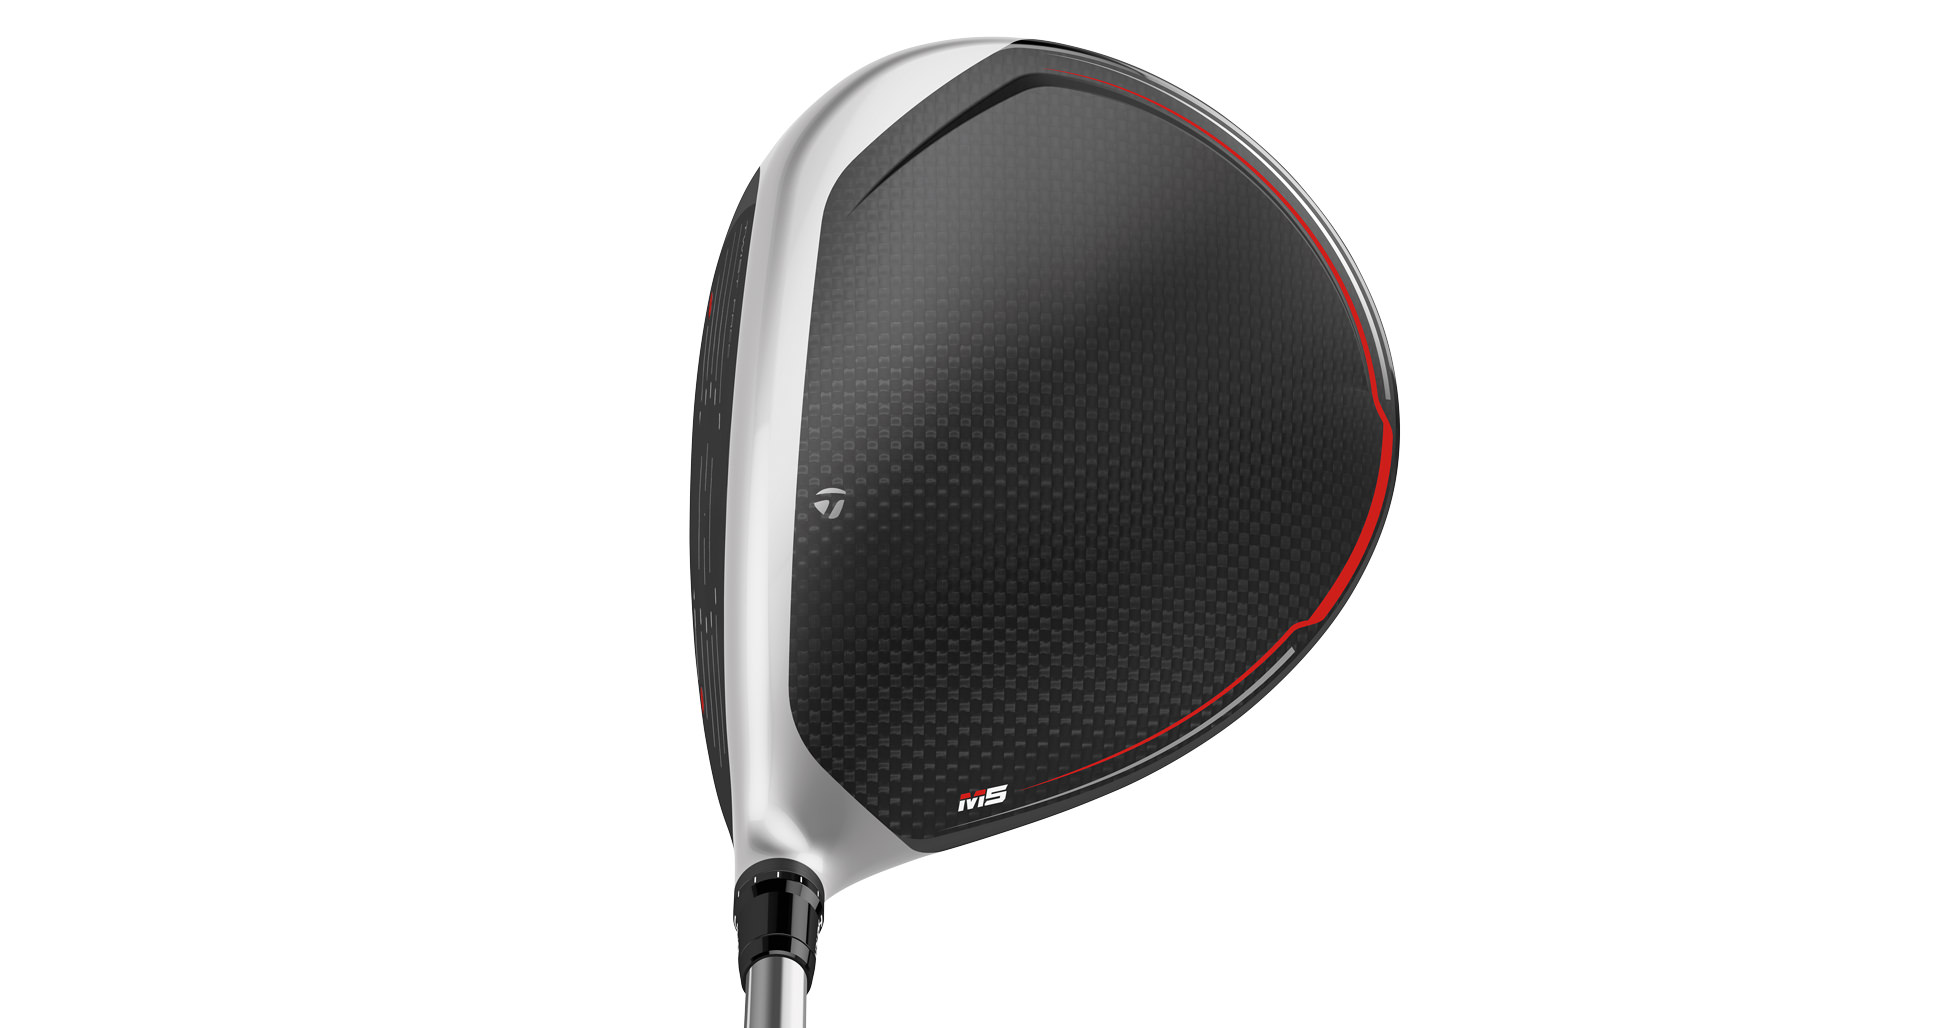 TaylorMade M5 driver vs. M6 driver